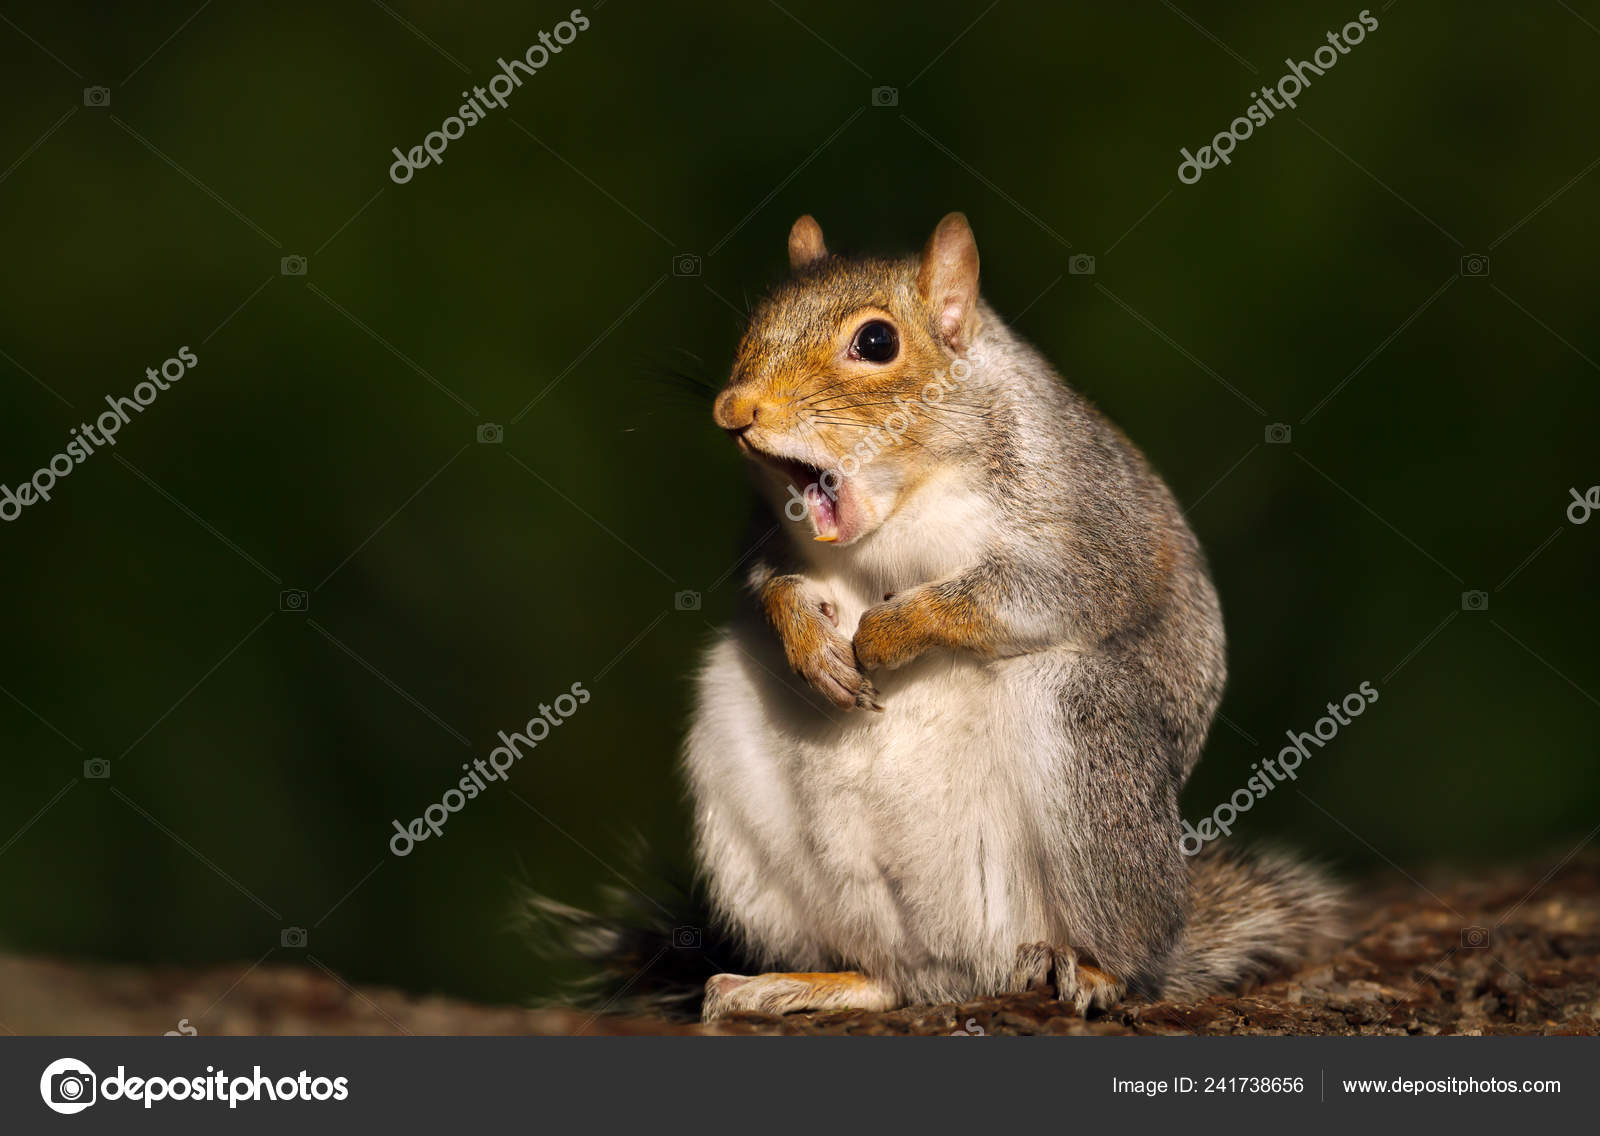 Funny squirrel Stock Photos, Royalty Free Funny squirrel Images |  Depositphotos